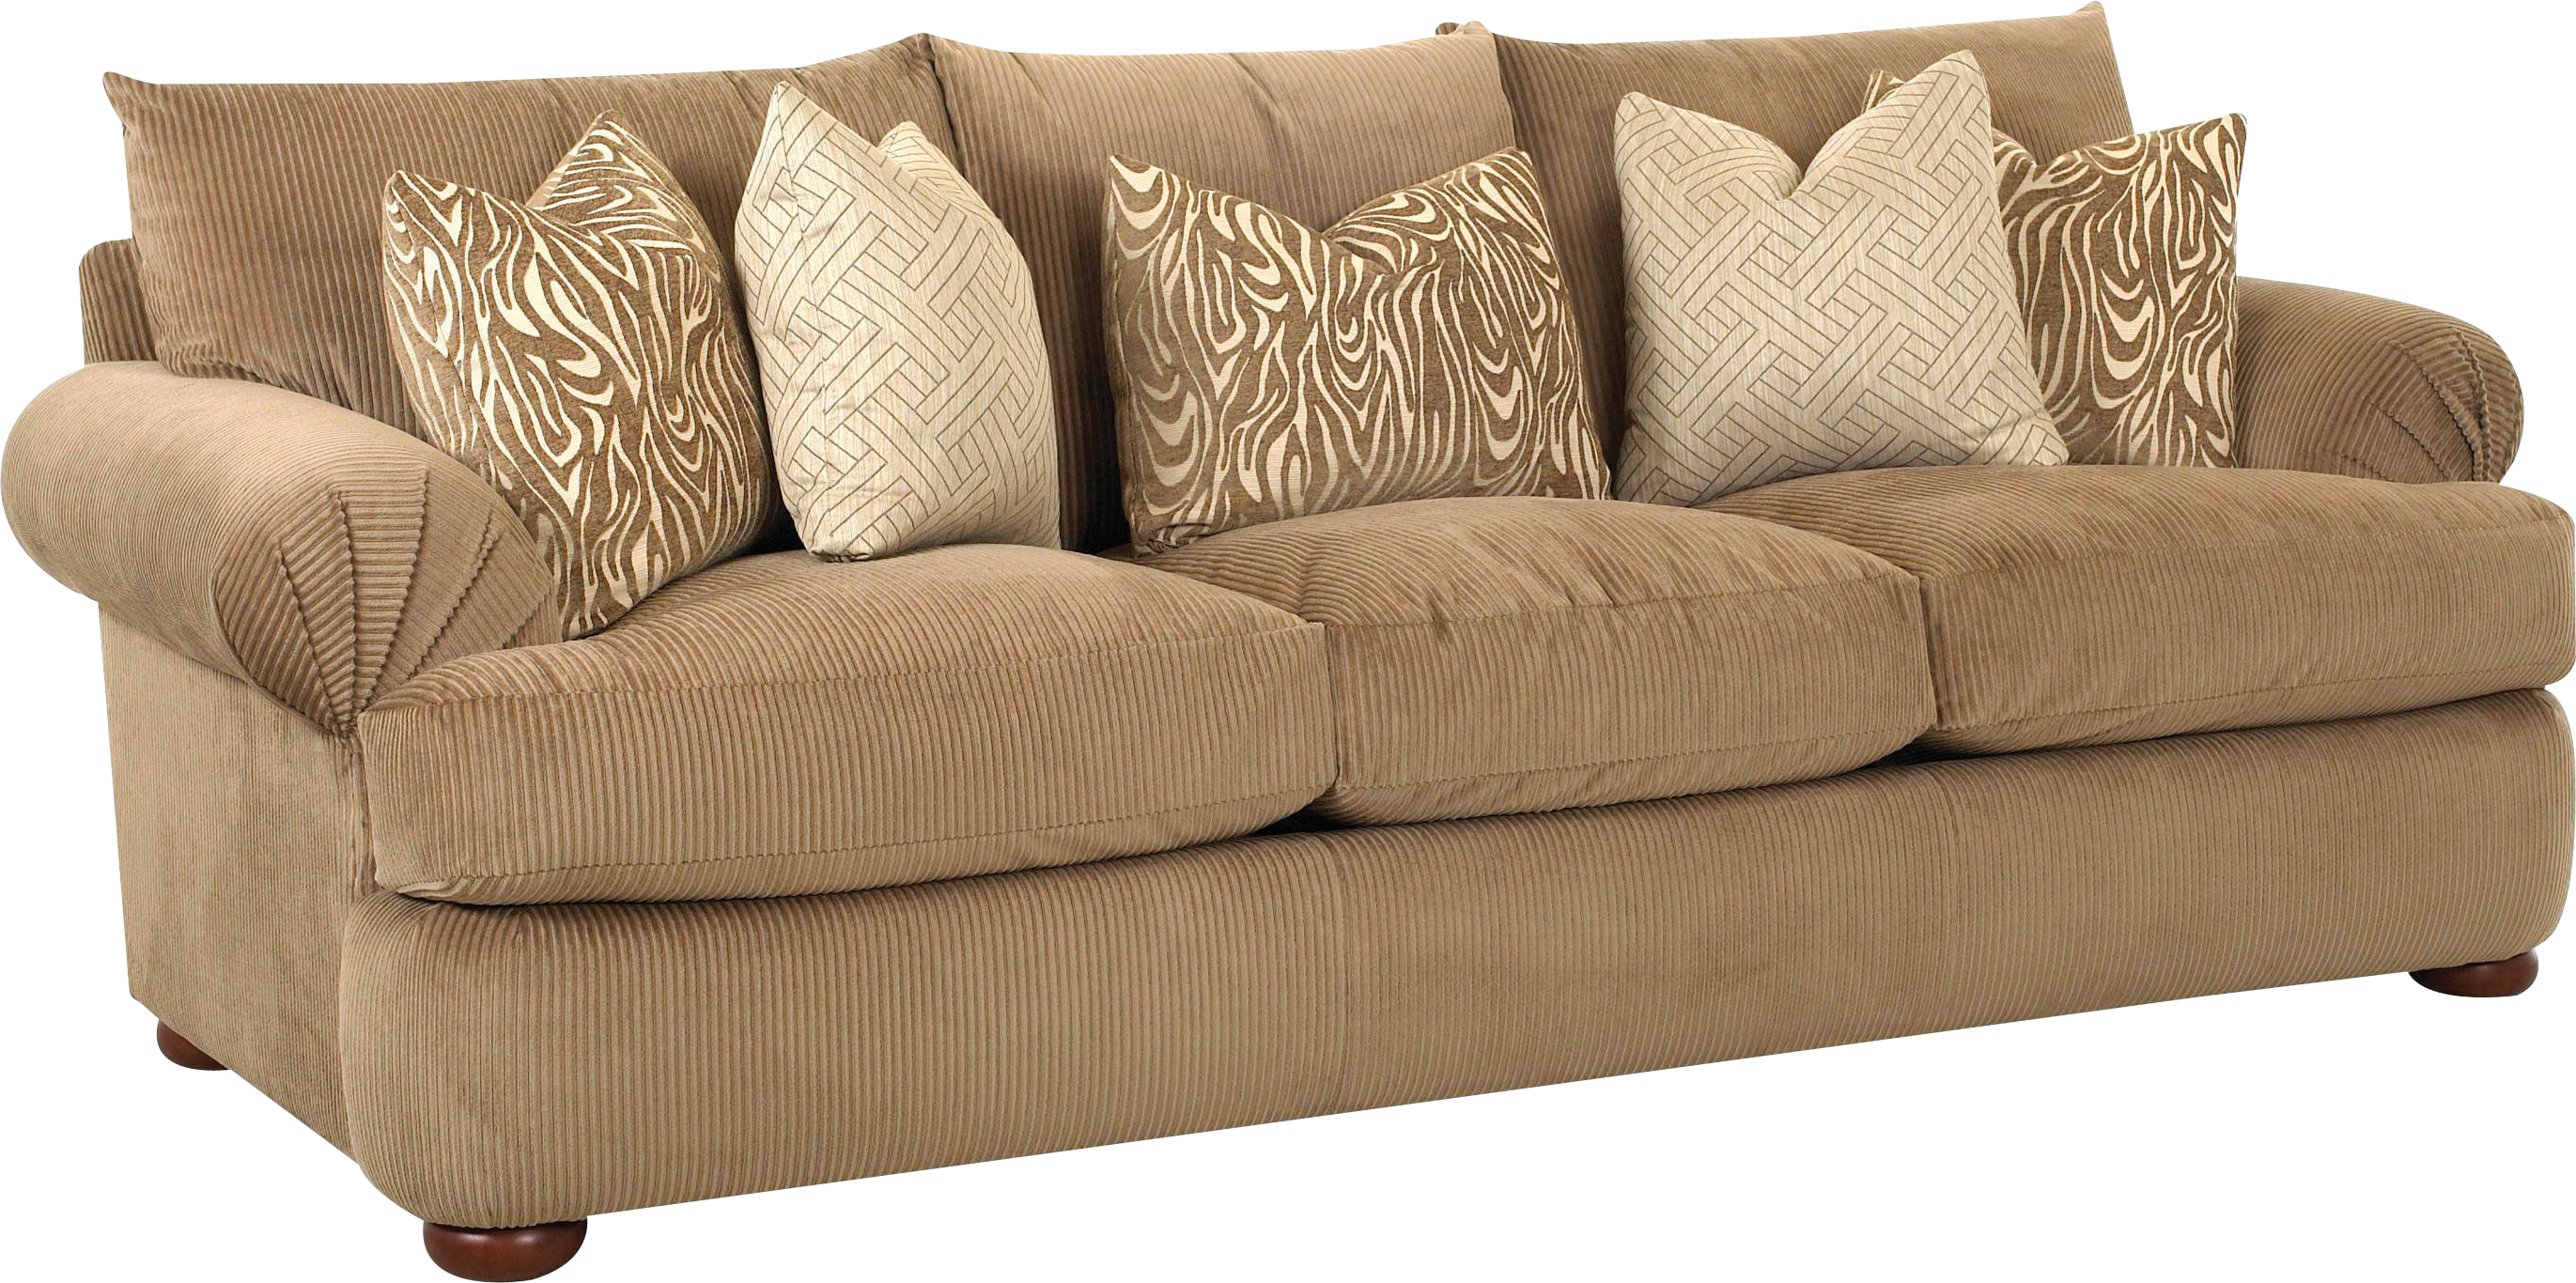 Sofa Chaise Longue PNG Image Background